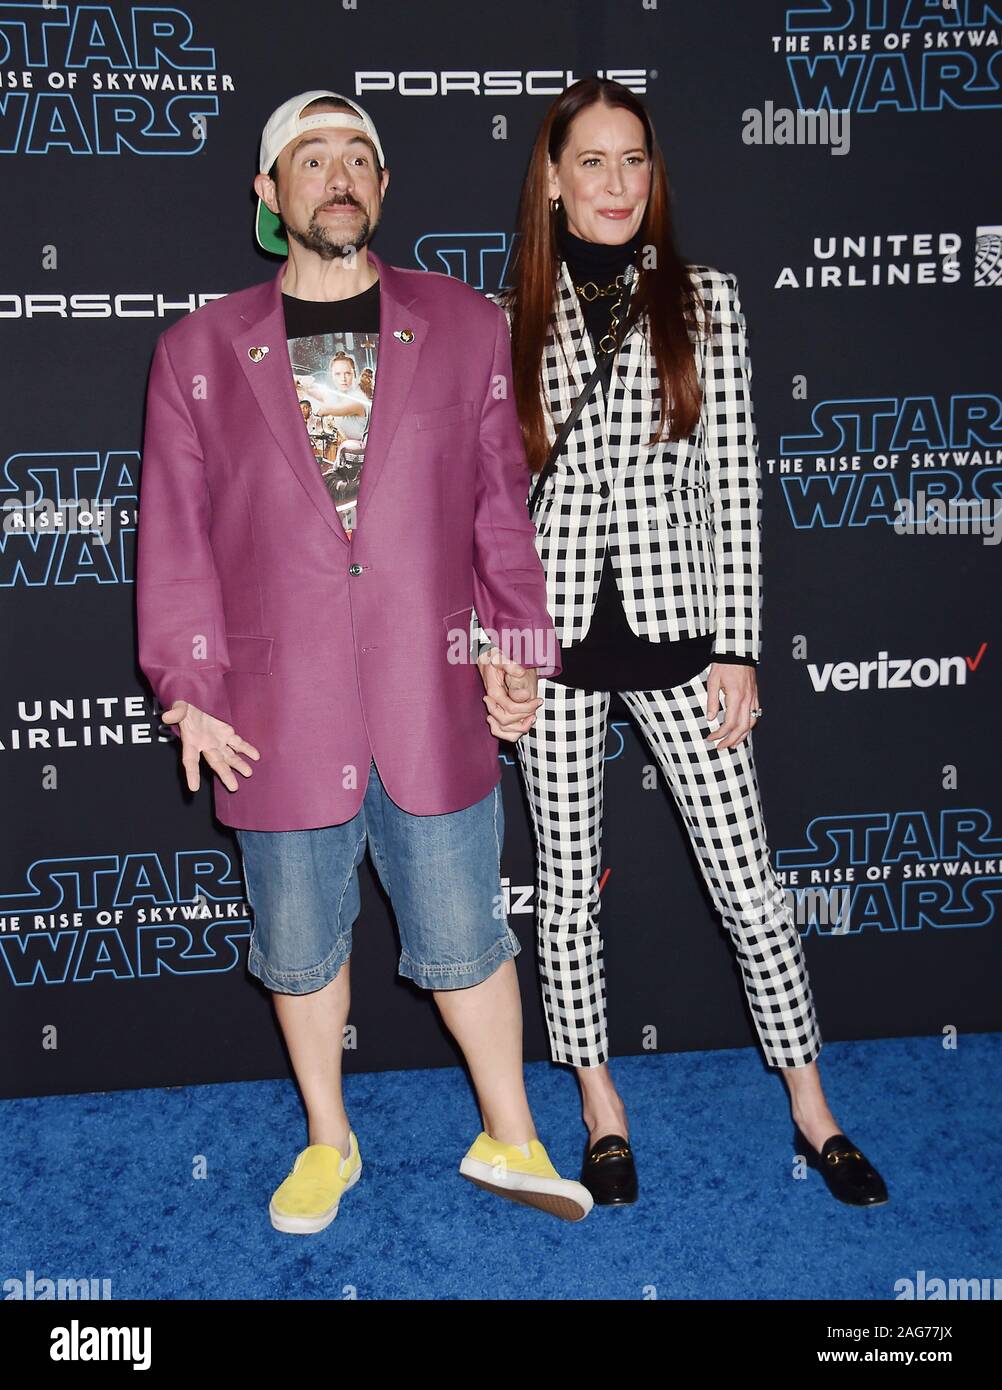 HOLLYWOOD, CA - DECEMBER 16: Kevin Smith and Jennifer Schwalbach attend the Premiere of Disney's 'Star Wars: The Rise Of Skywalker' at the El Capitan Theatre on December 16, 2019 in Hollywood, California. Stock Photo